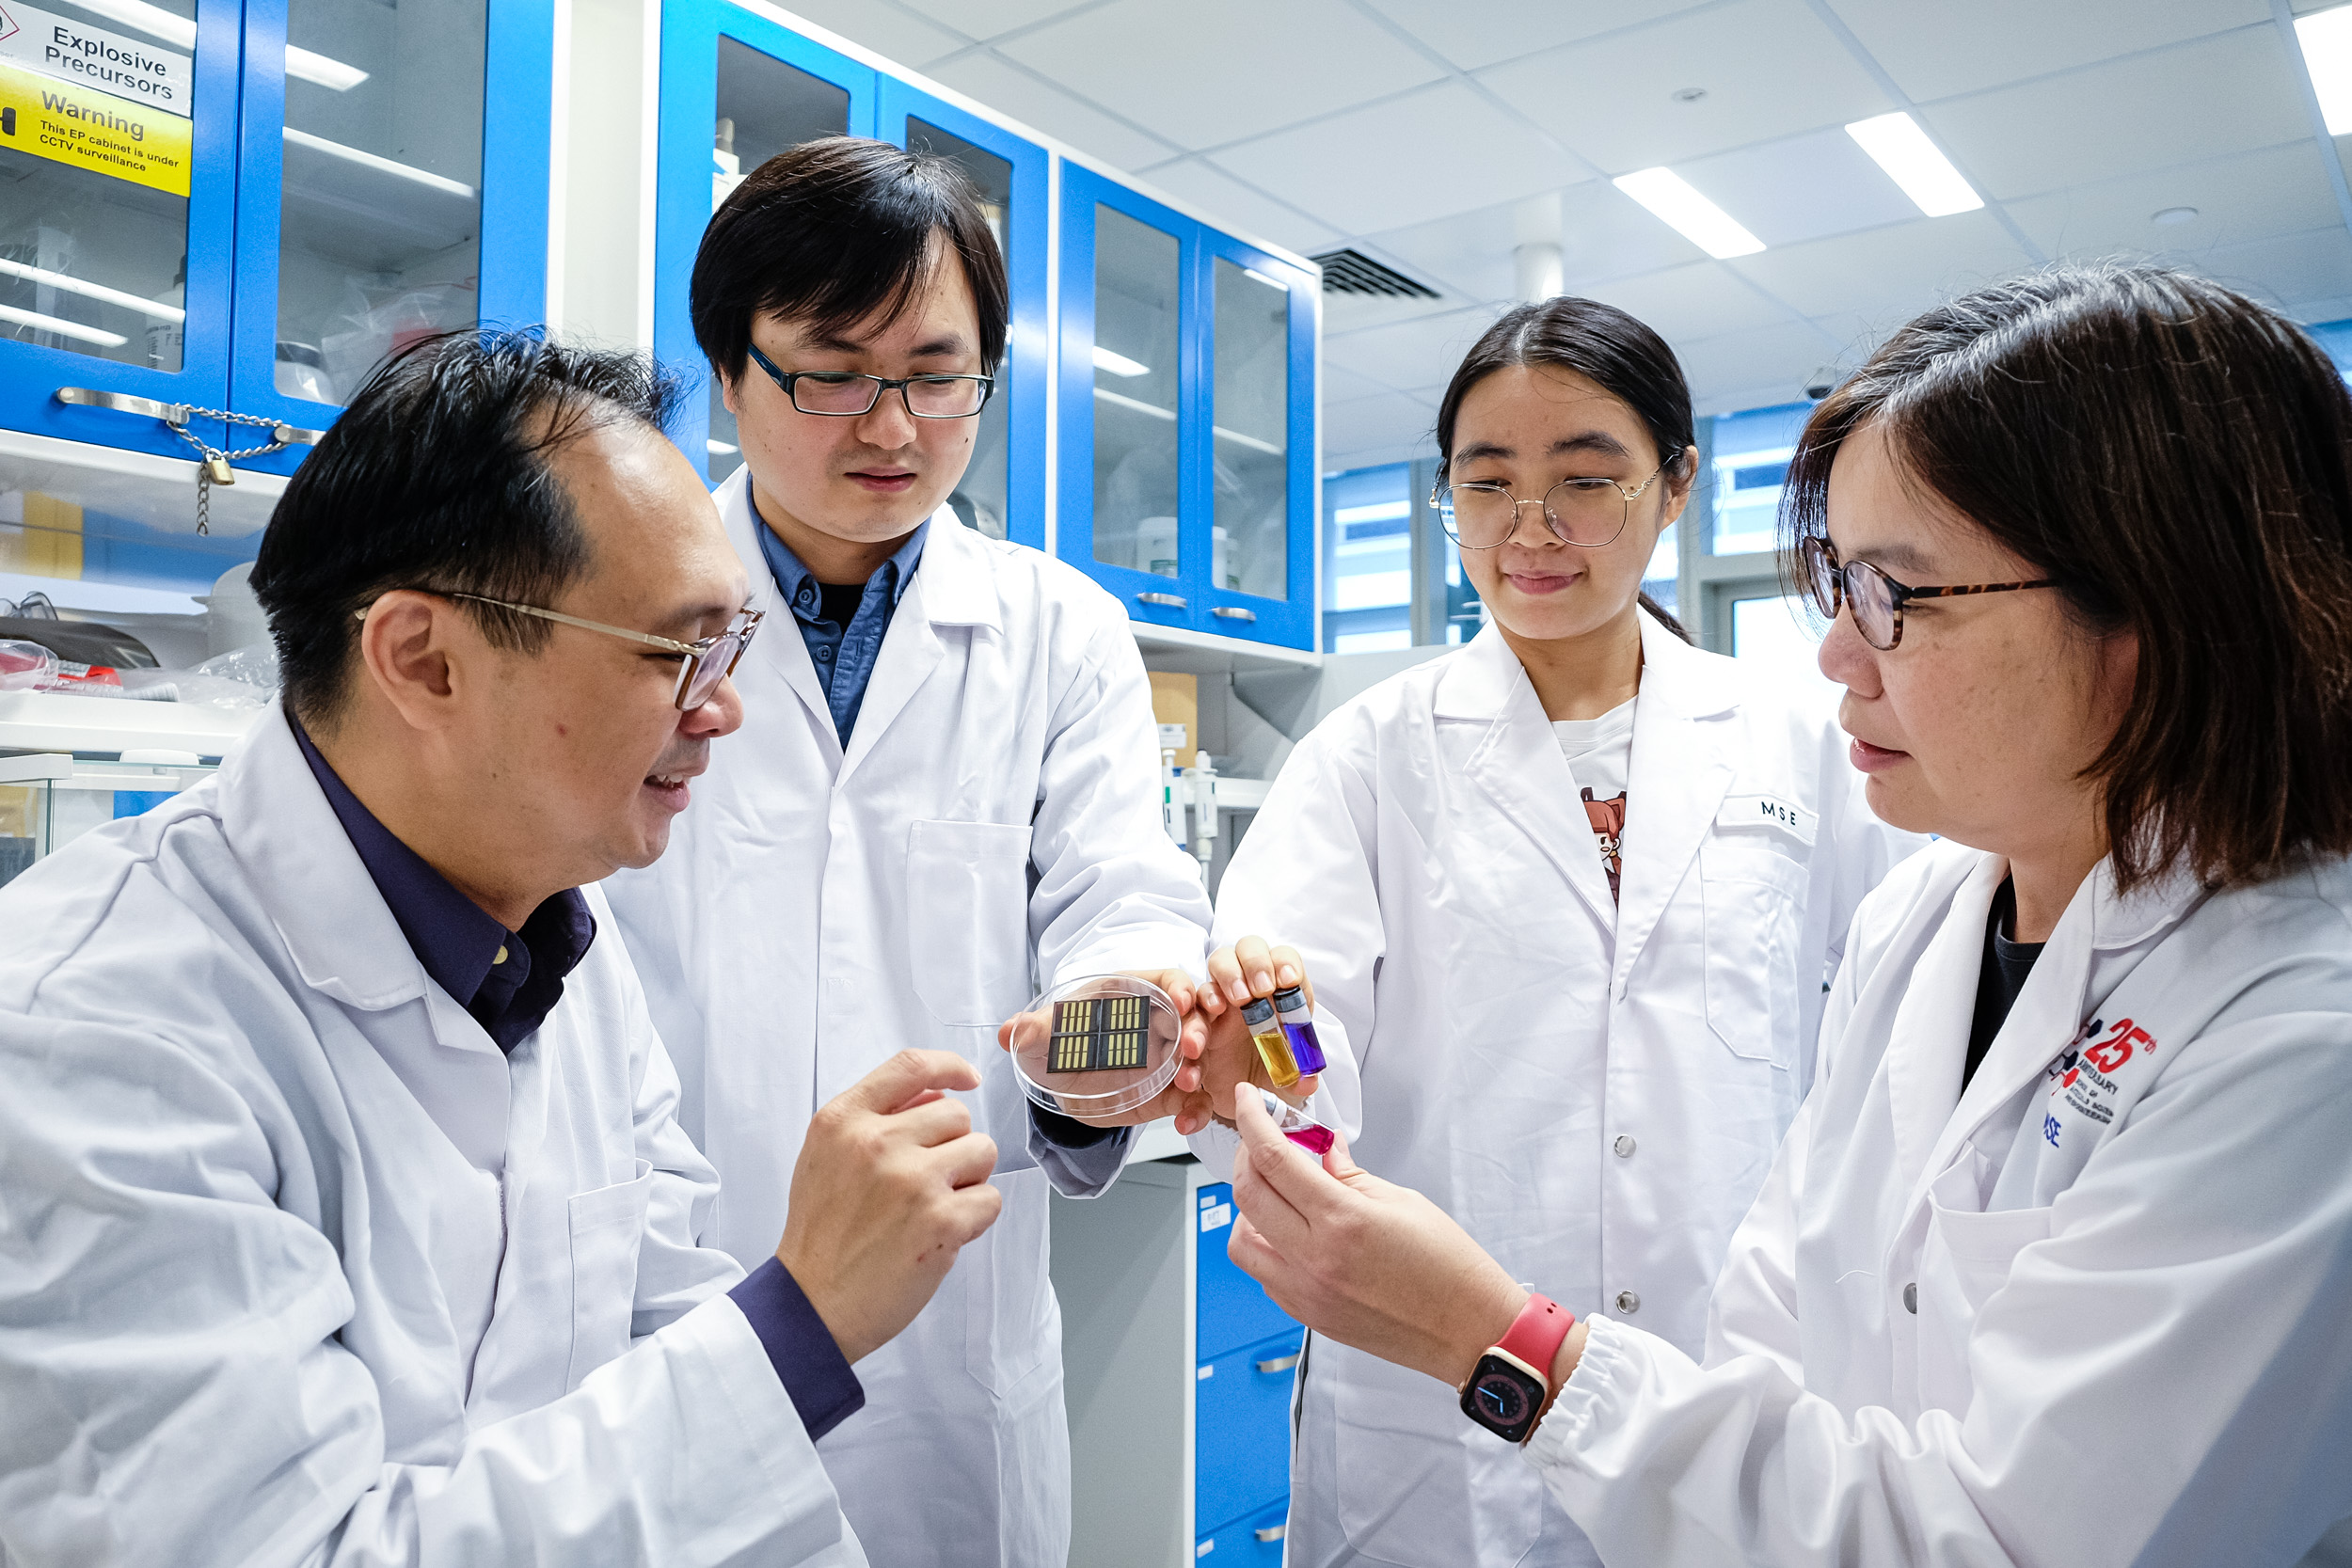 Professor Sum Tze Chien; Dr Ye Senyun, research fellow from NTU’s School of Physical and Mathematical Sciences; Dr Rao Haixia, and Professor Lam Yeng Ming